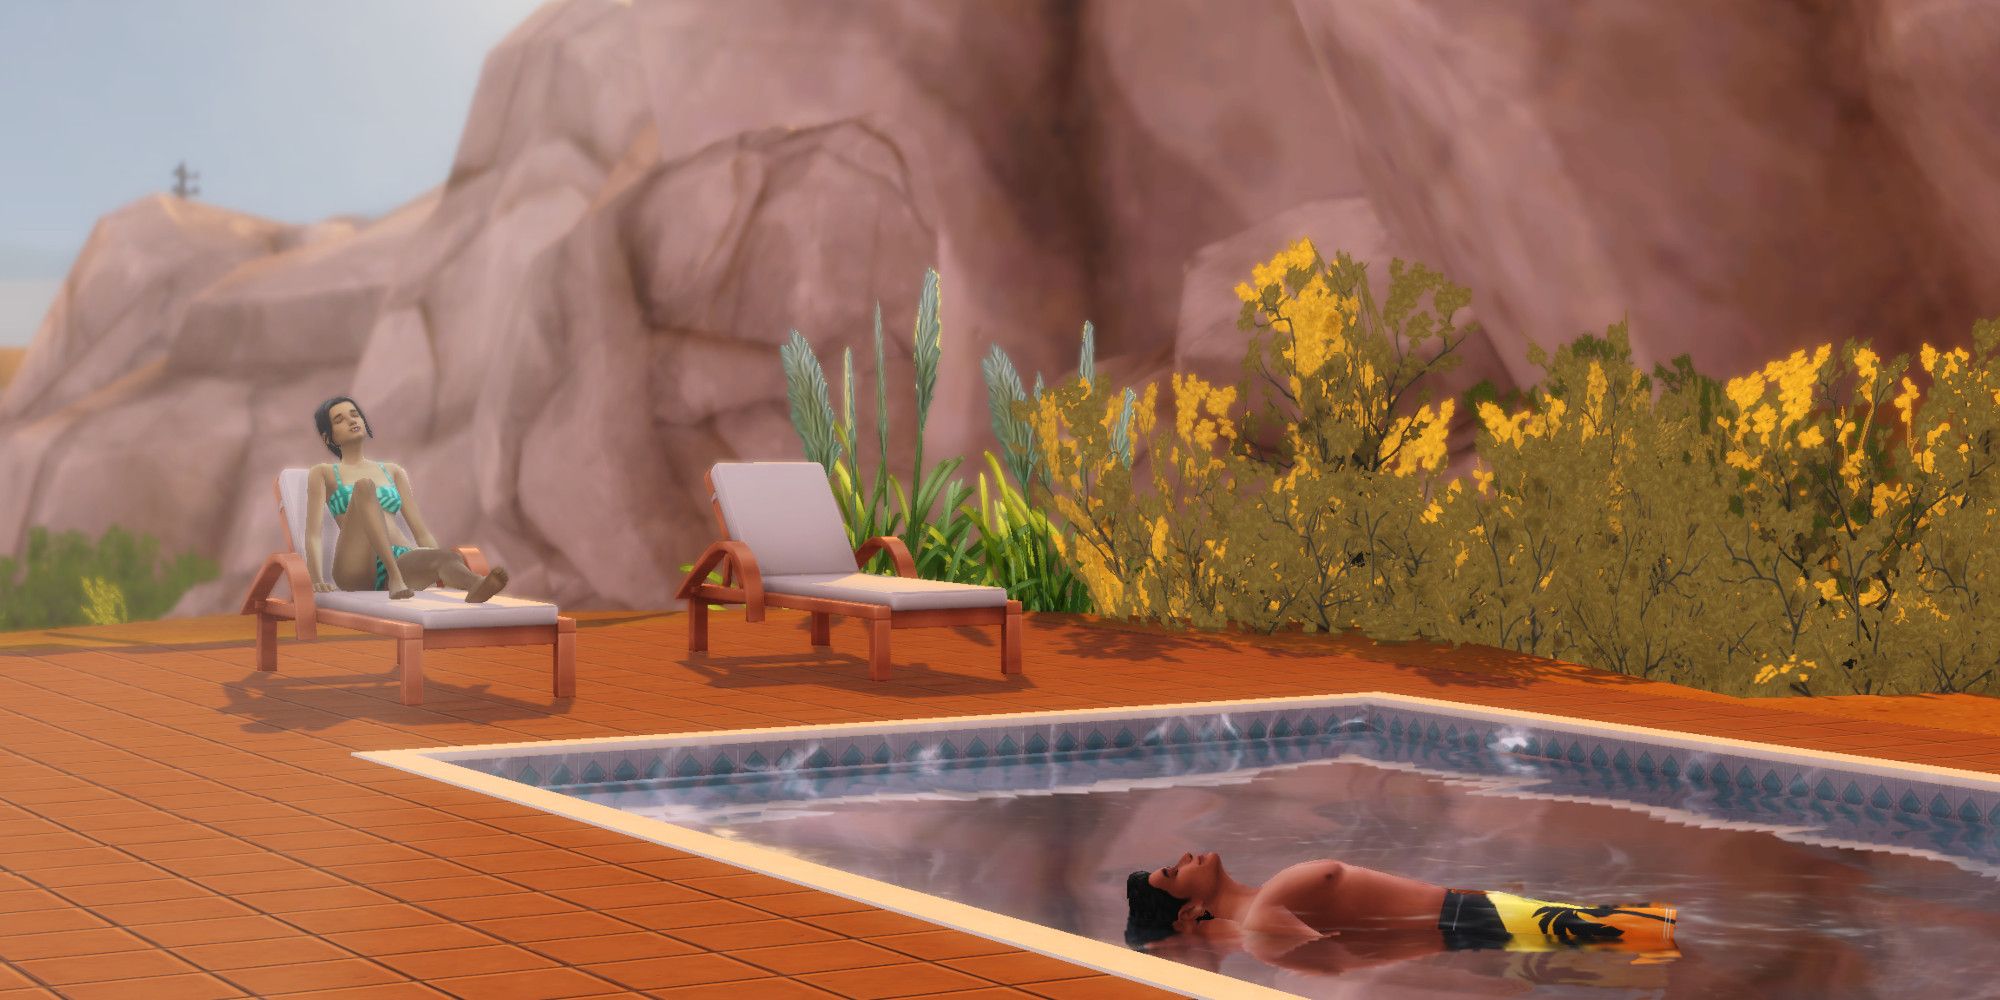 Two Sims from The Sims 4 in Oasis Springs.  One is lying in a chair by the pool, the other is floating in it on his back